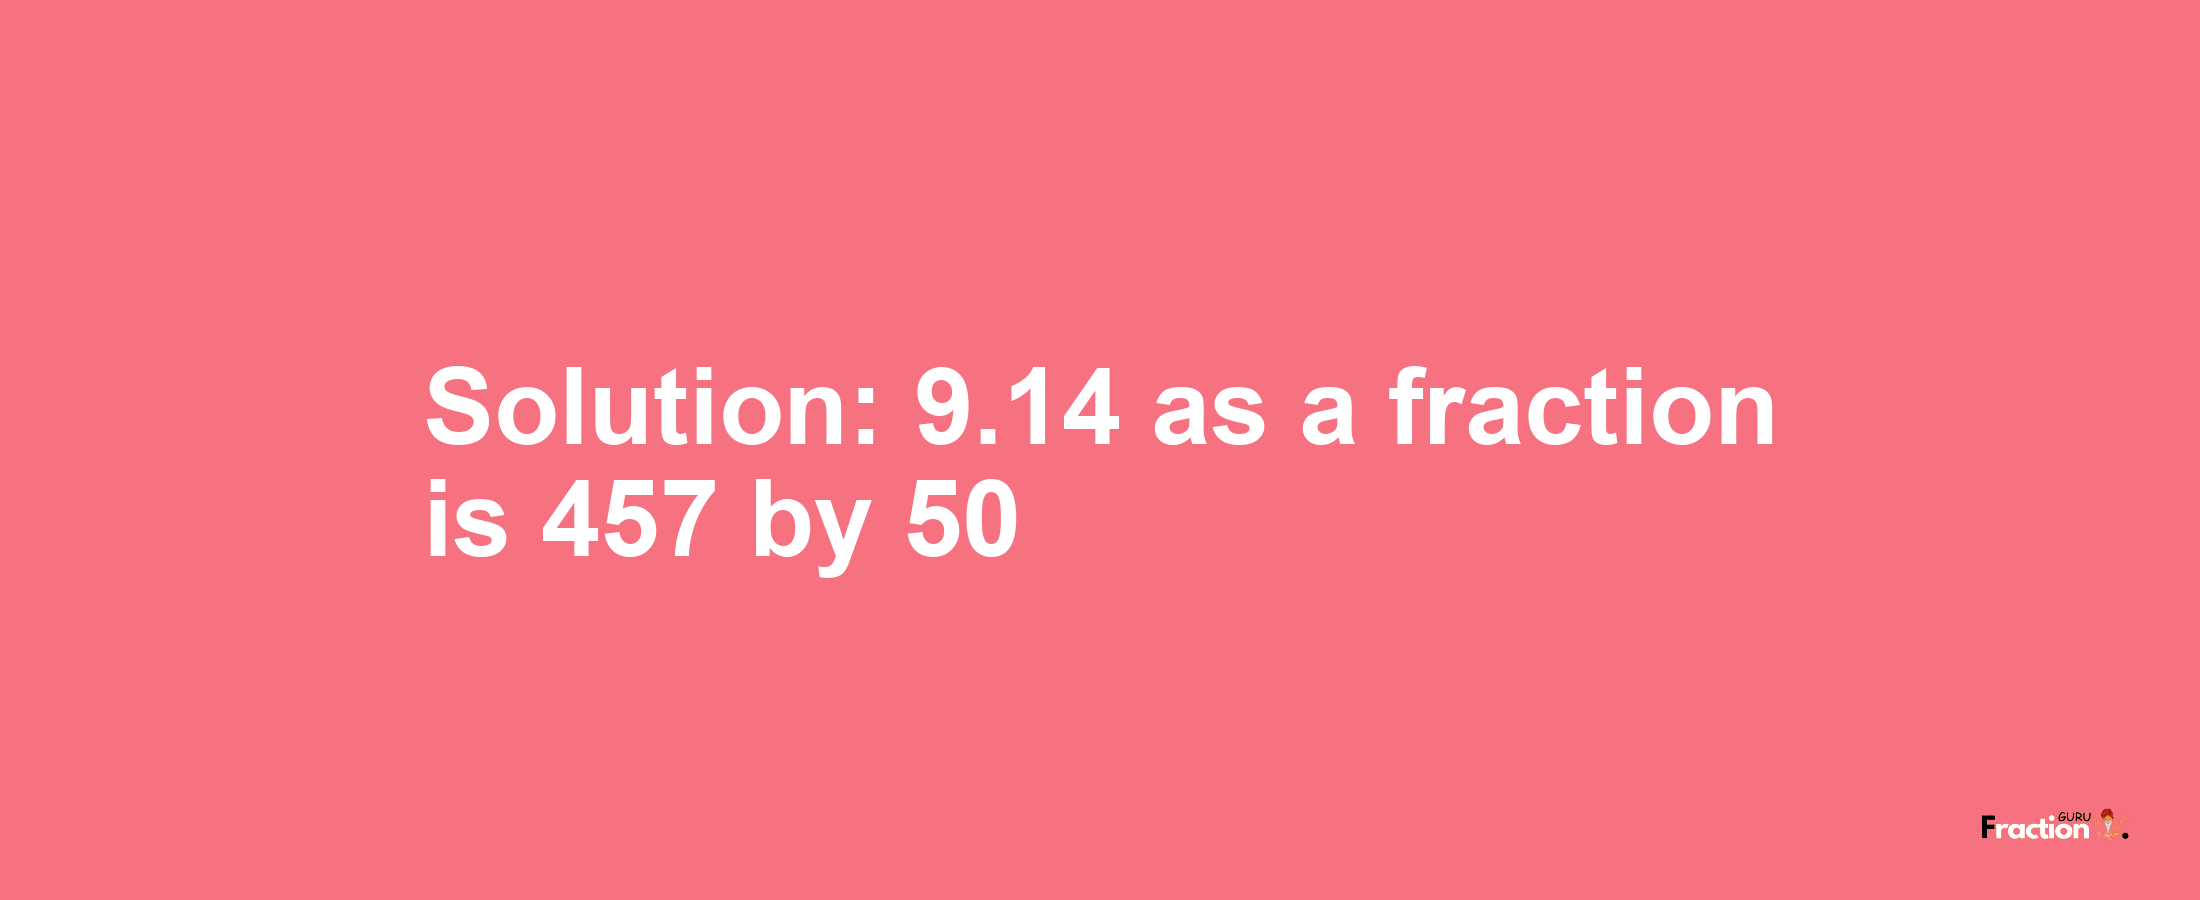 Solution:9.14 as a fraction is 457/50